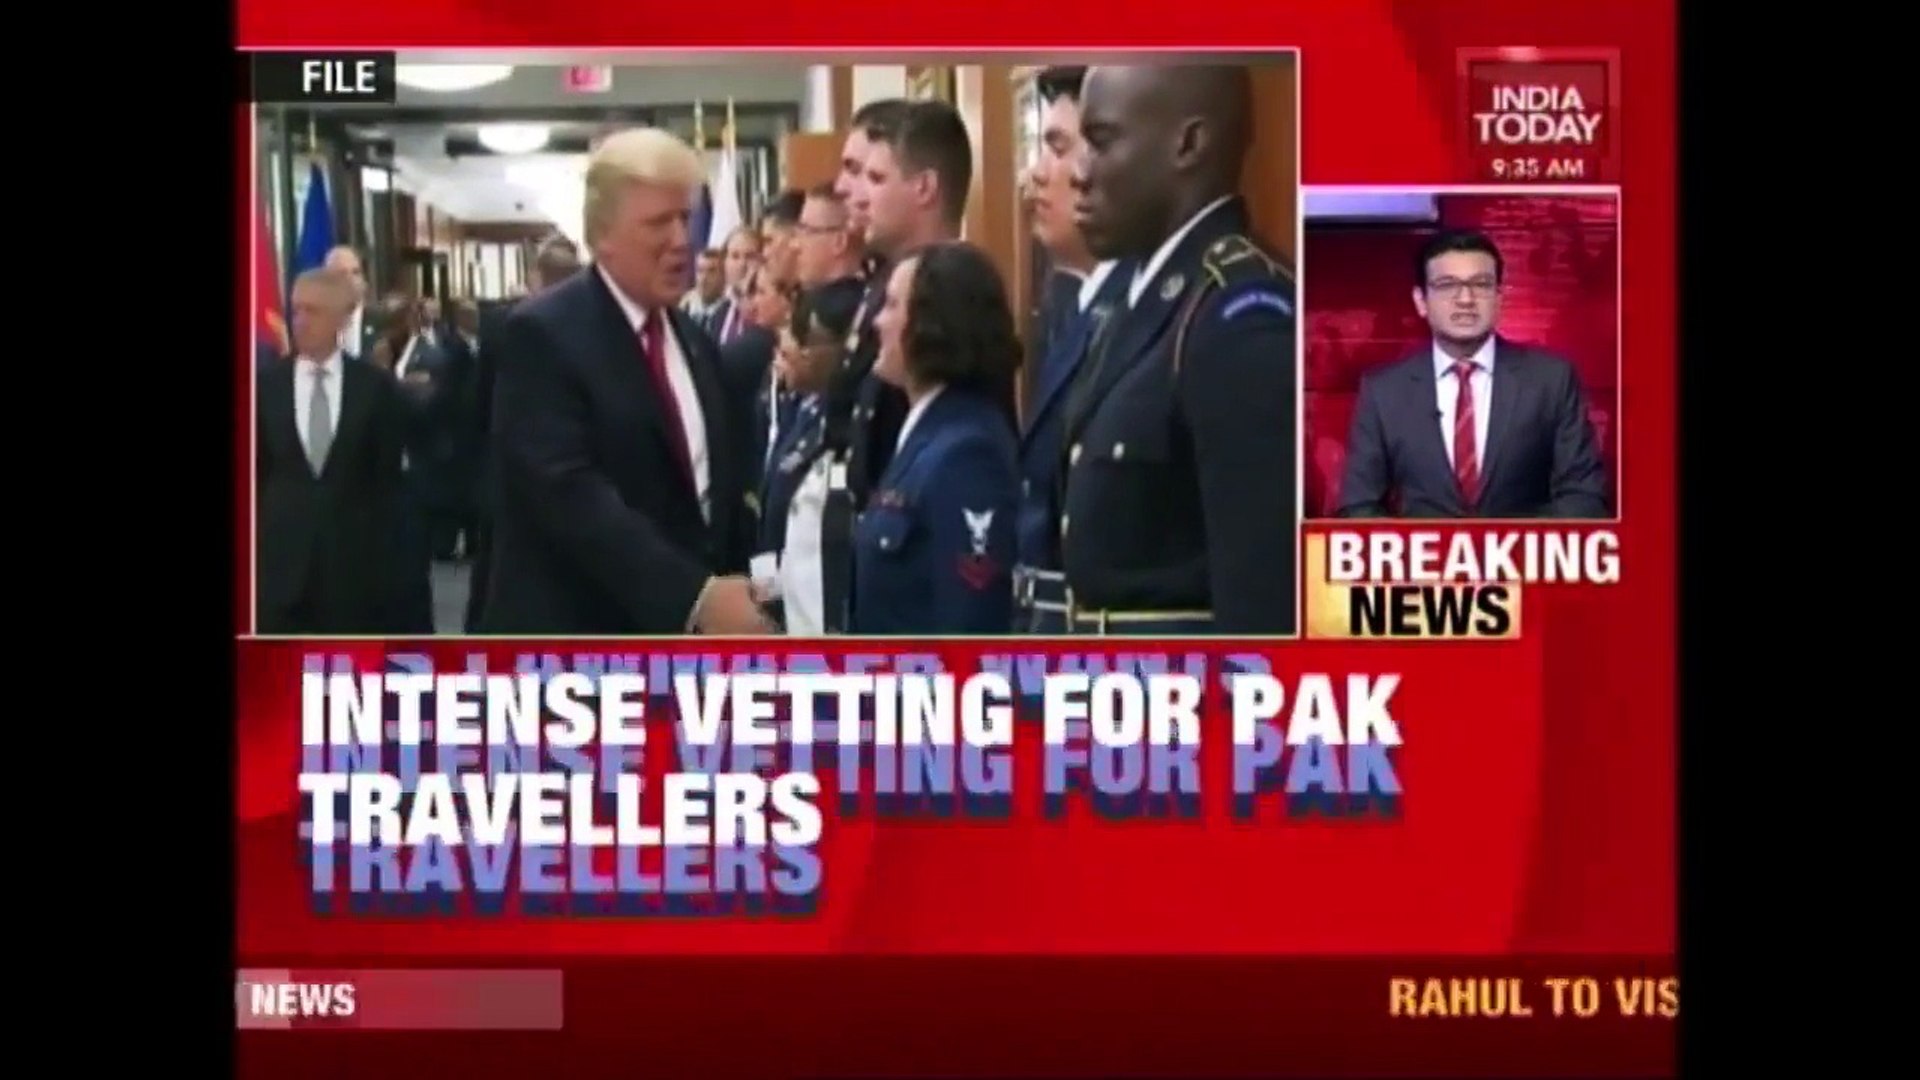 U.S Lawmaker Calls For Strong Vetting On Immigrants From Pakistan